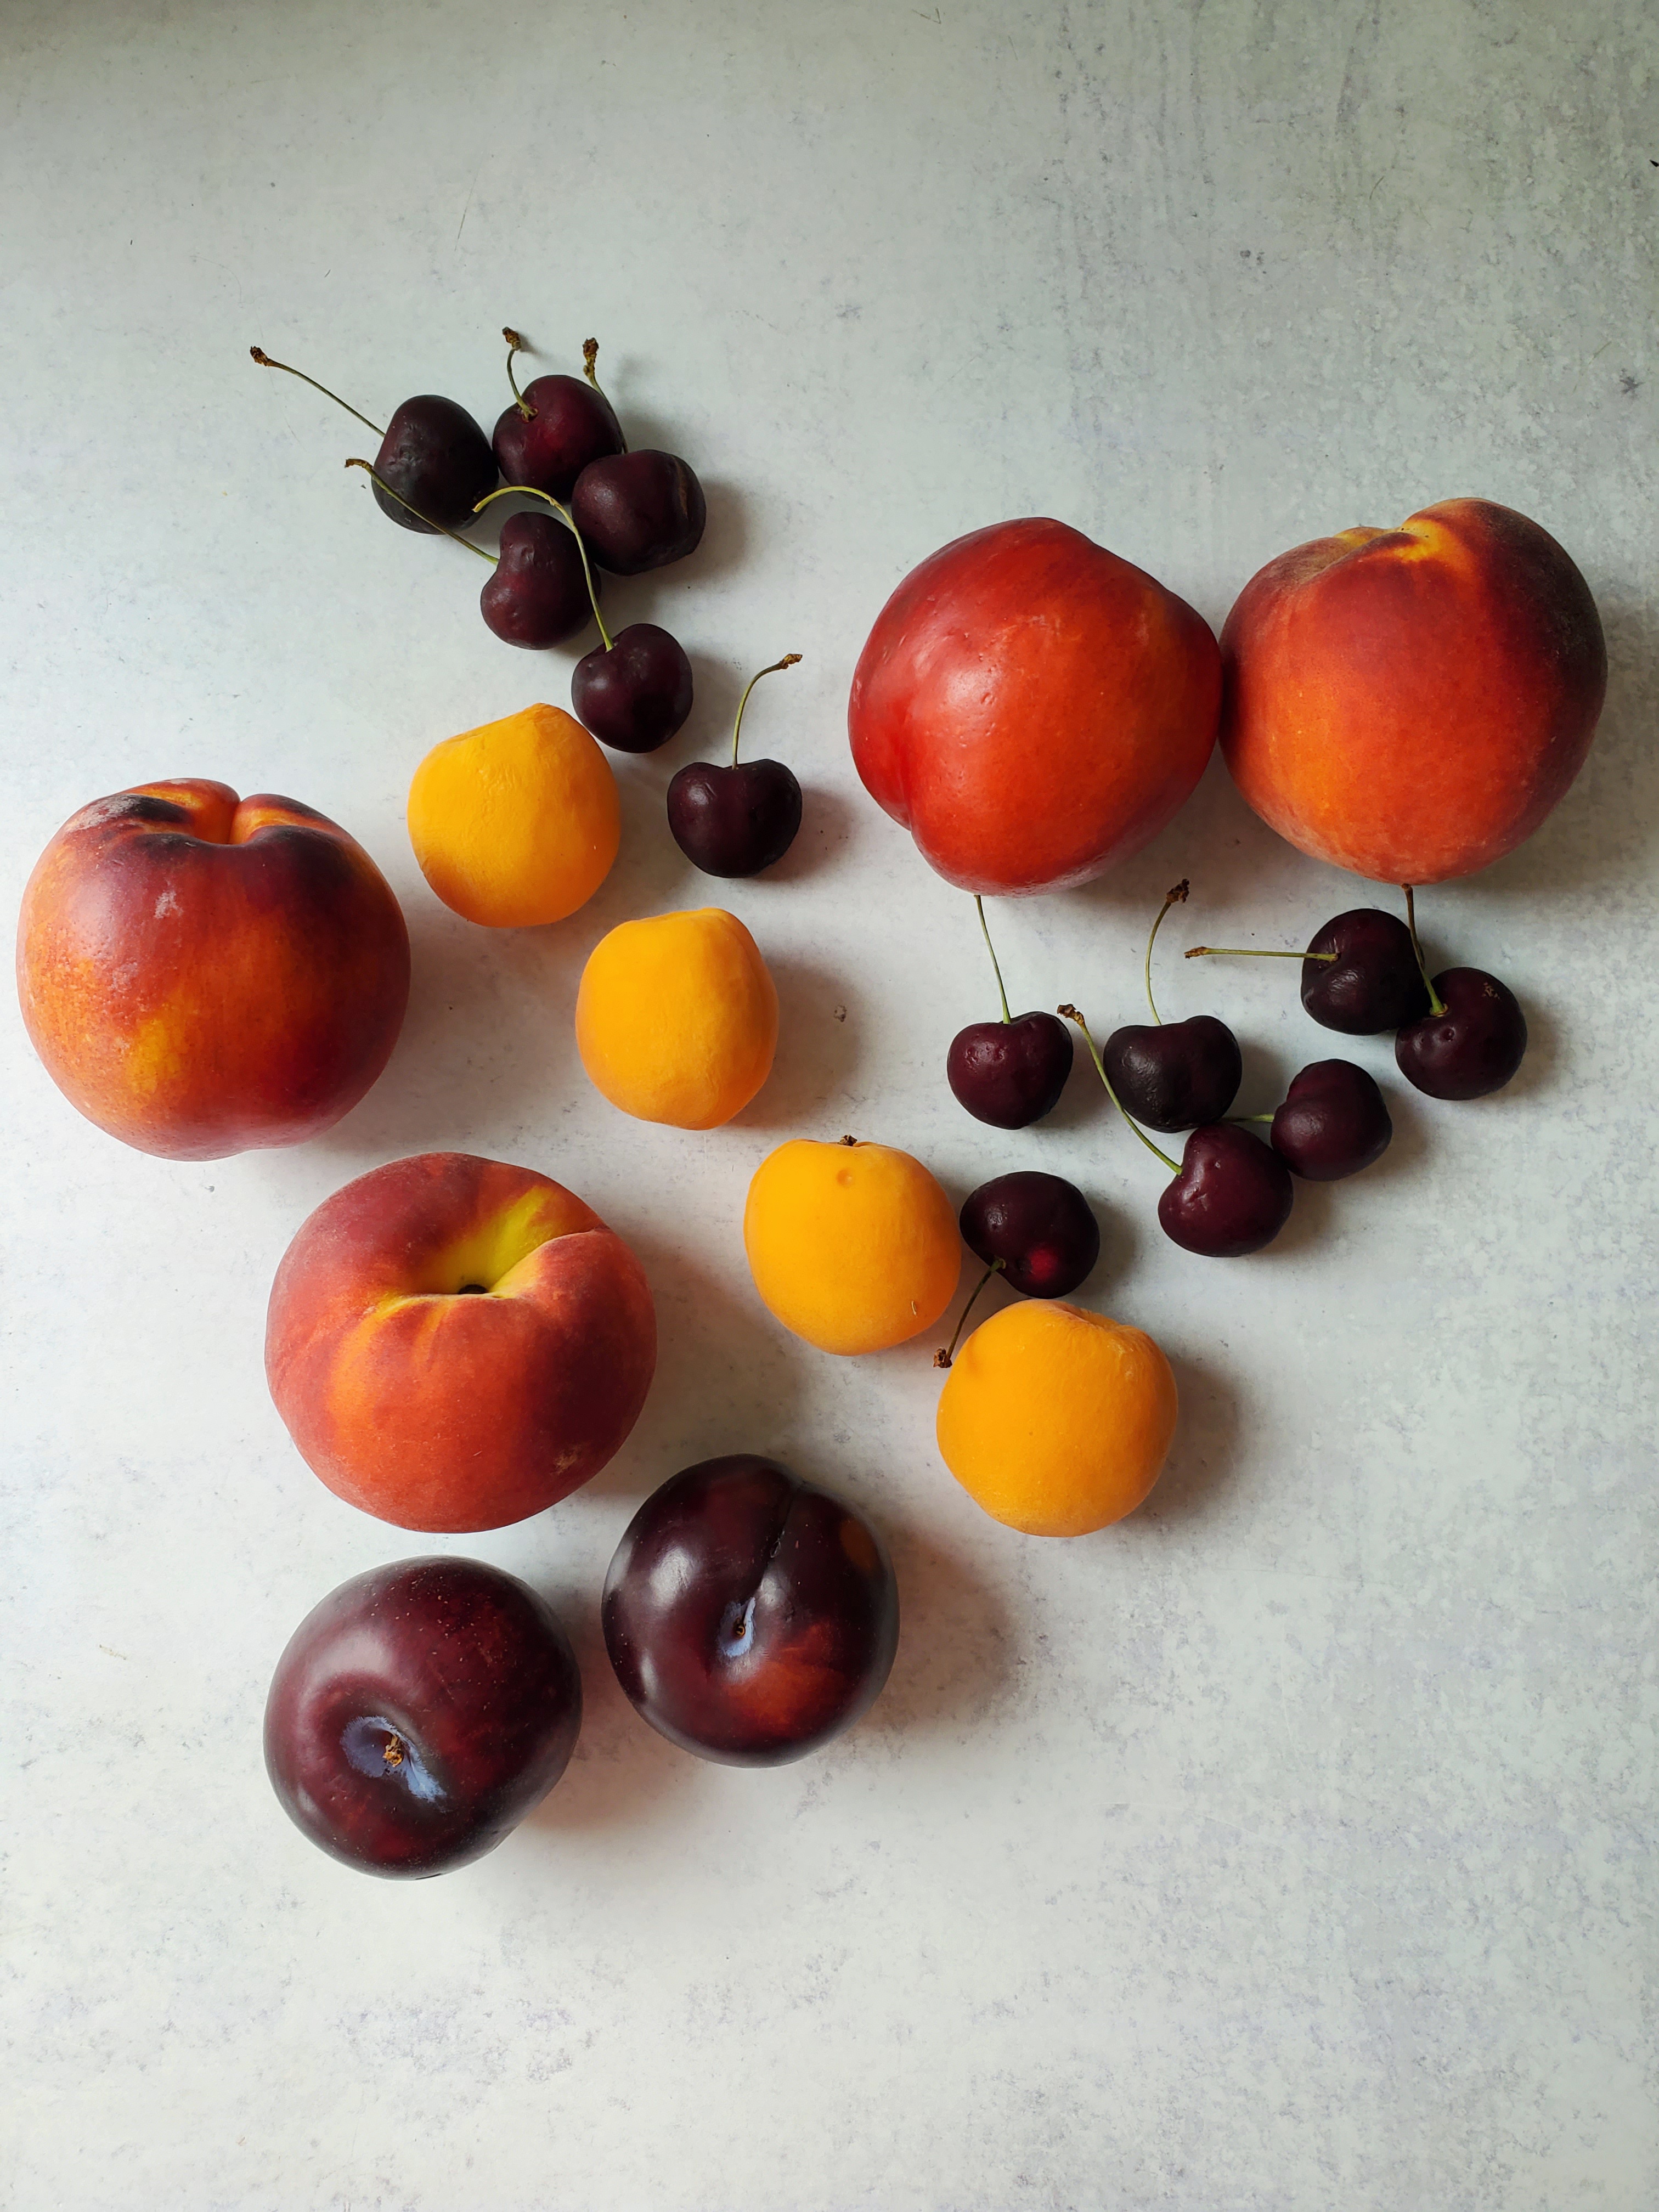 Stone Fruits:  plums, cherries, nectarines, peaches, apricots